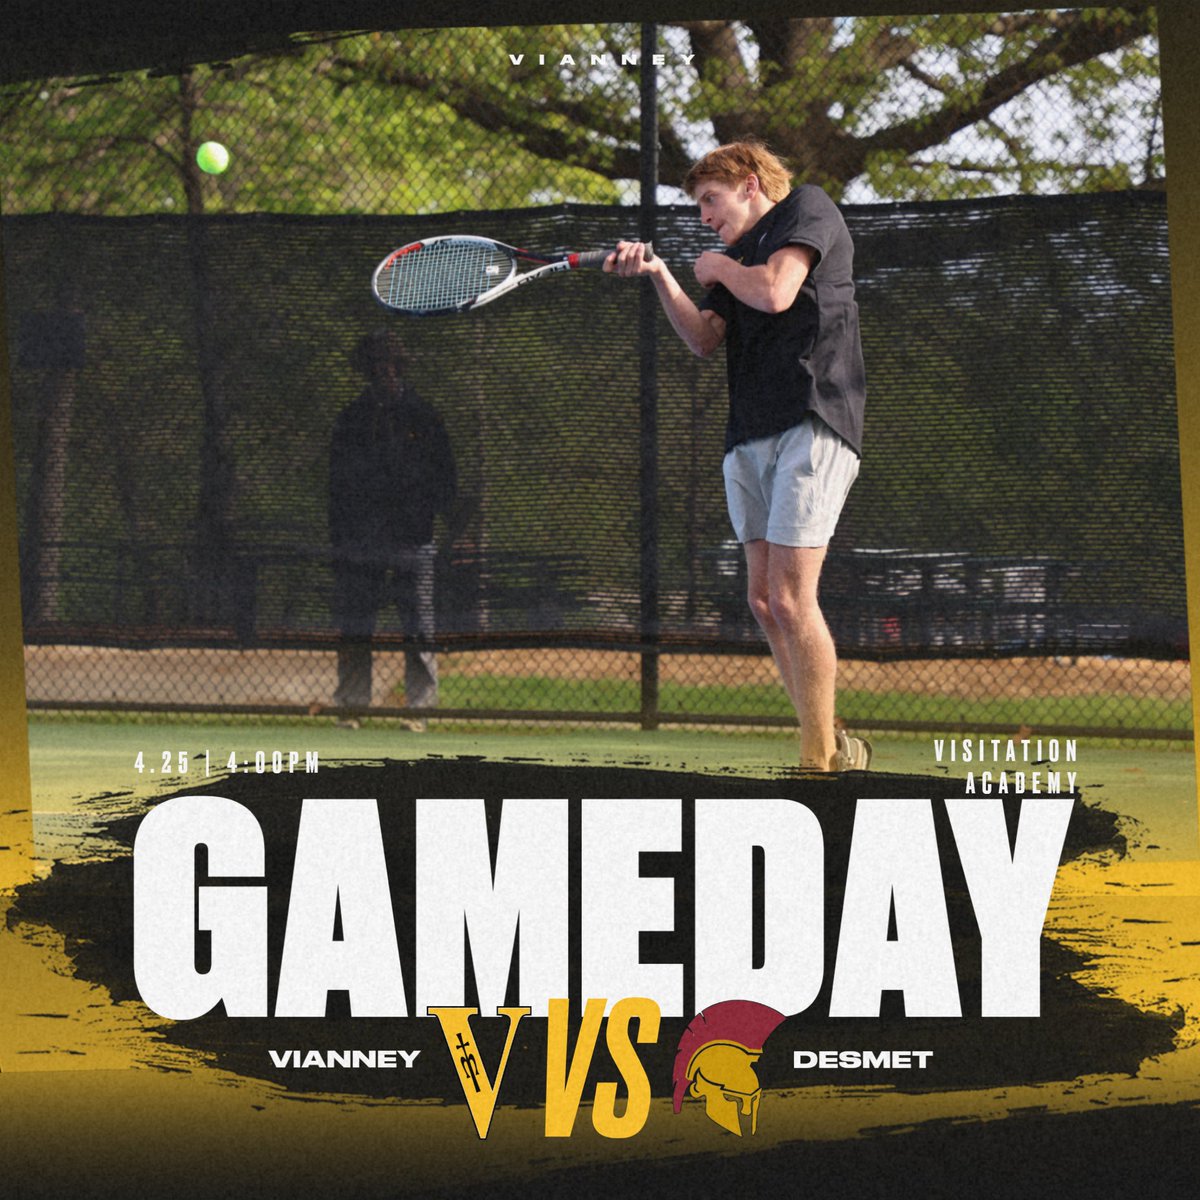 It's Gameday! We have Varsity Baseball and Tennis in action, and Volleyball will be hosting SLUH tonight for their Cancer Awareness Match #HigginsStrong #VianneyVolleyball #VianneyBaseball #VianneyTennis